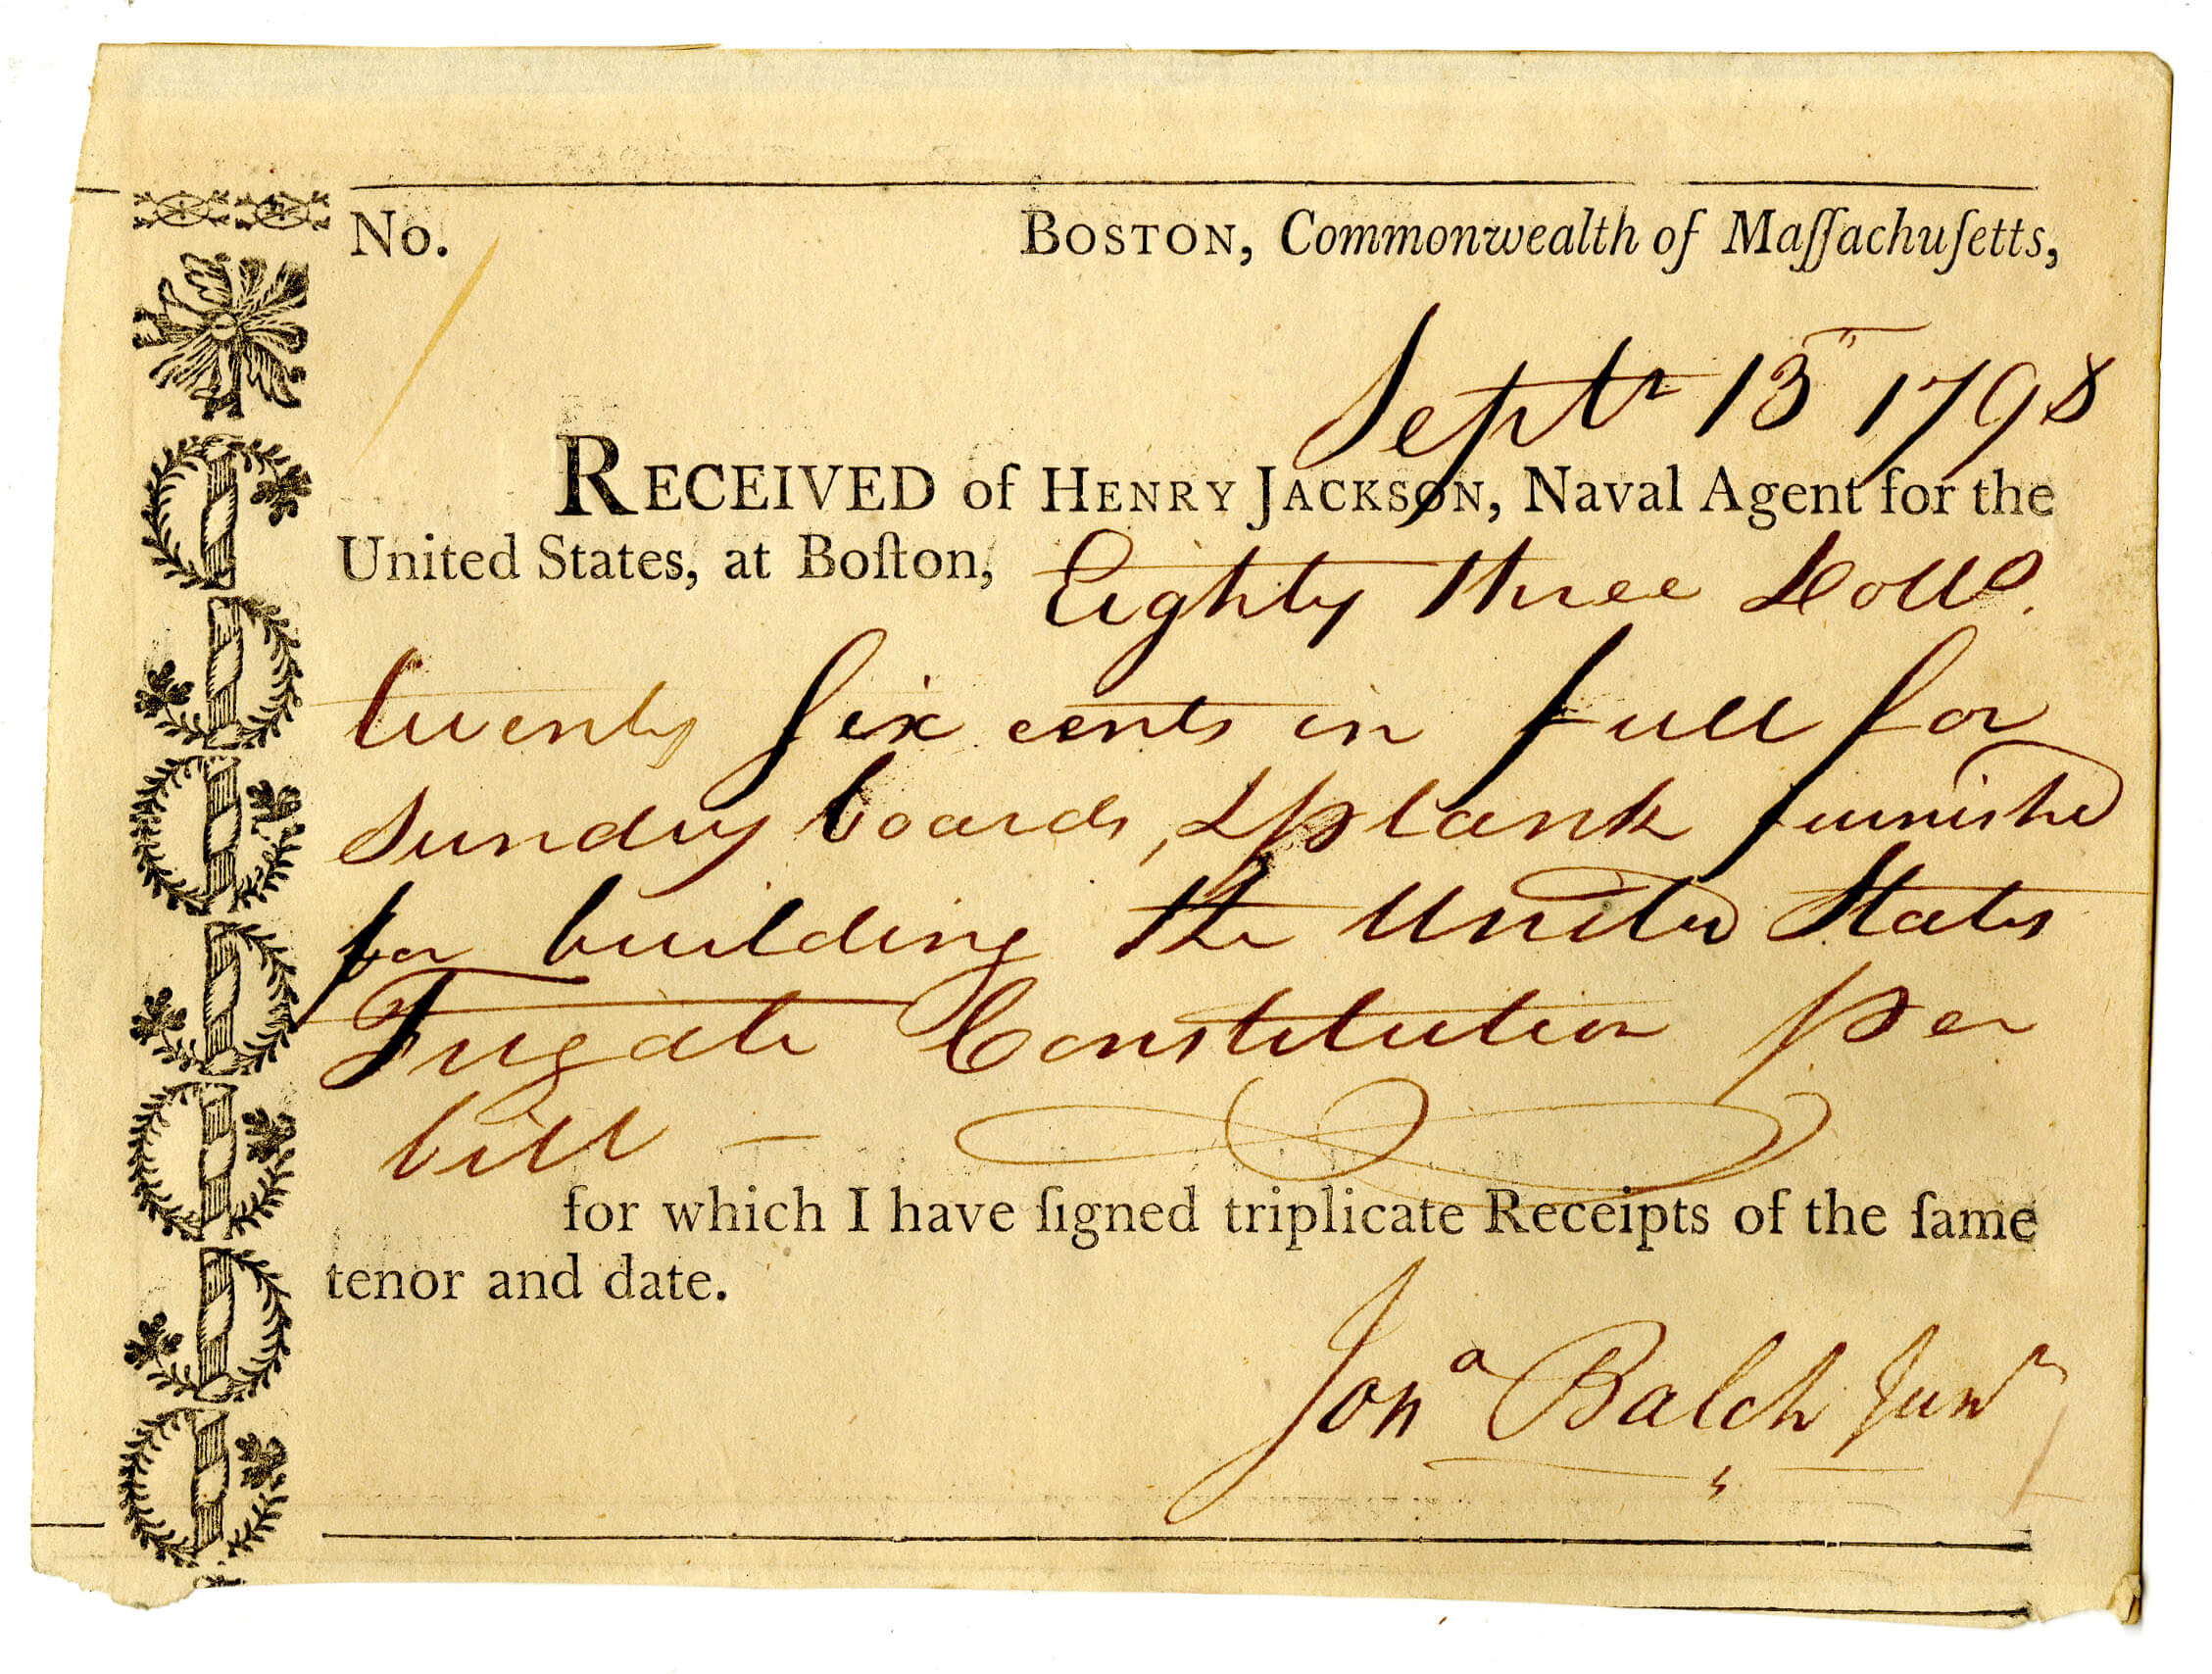 Receipt for sundry boards and planks furnished for building USS Constitution, September 13, 1798. [Alexander Gaston Gift]